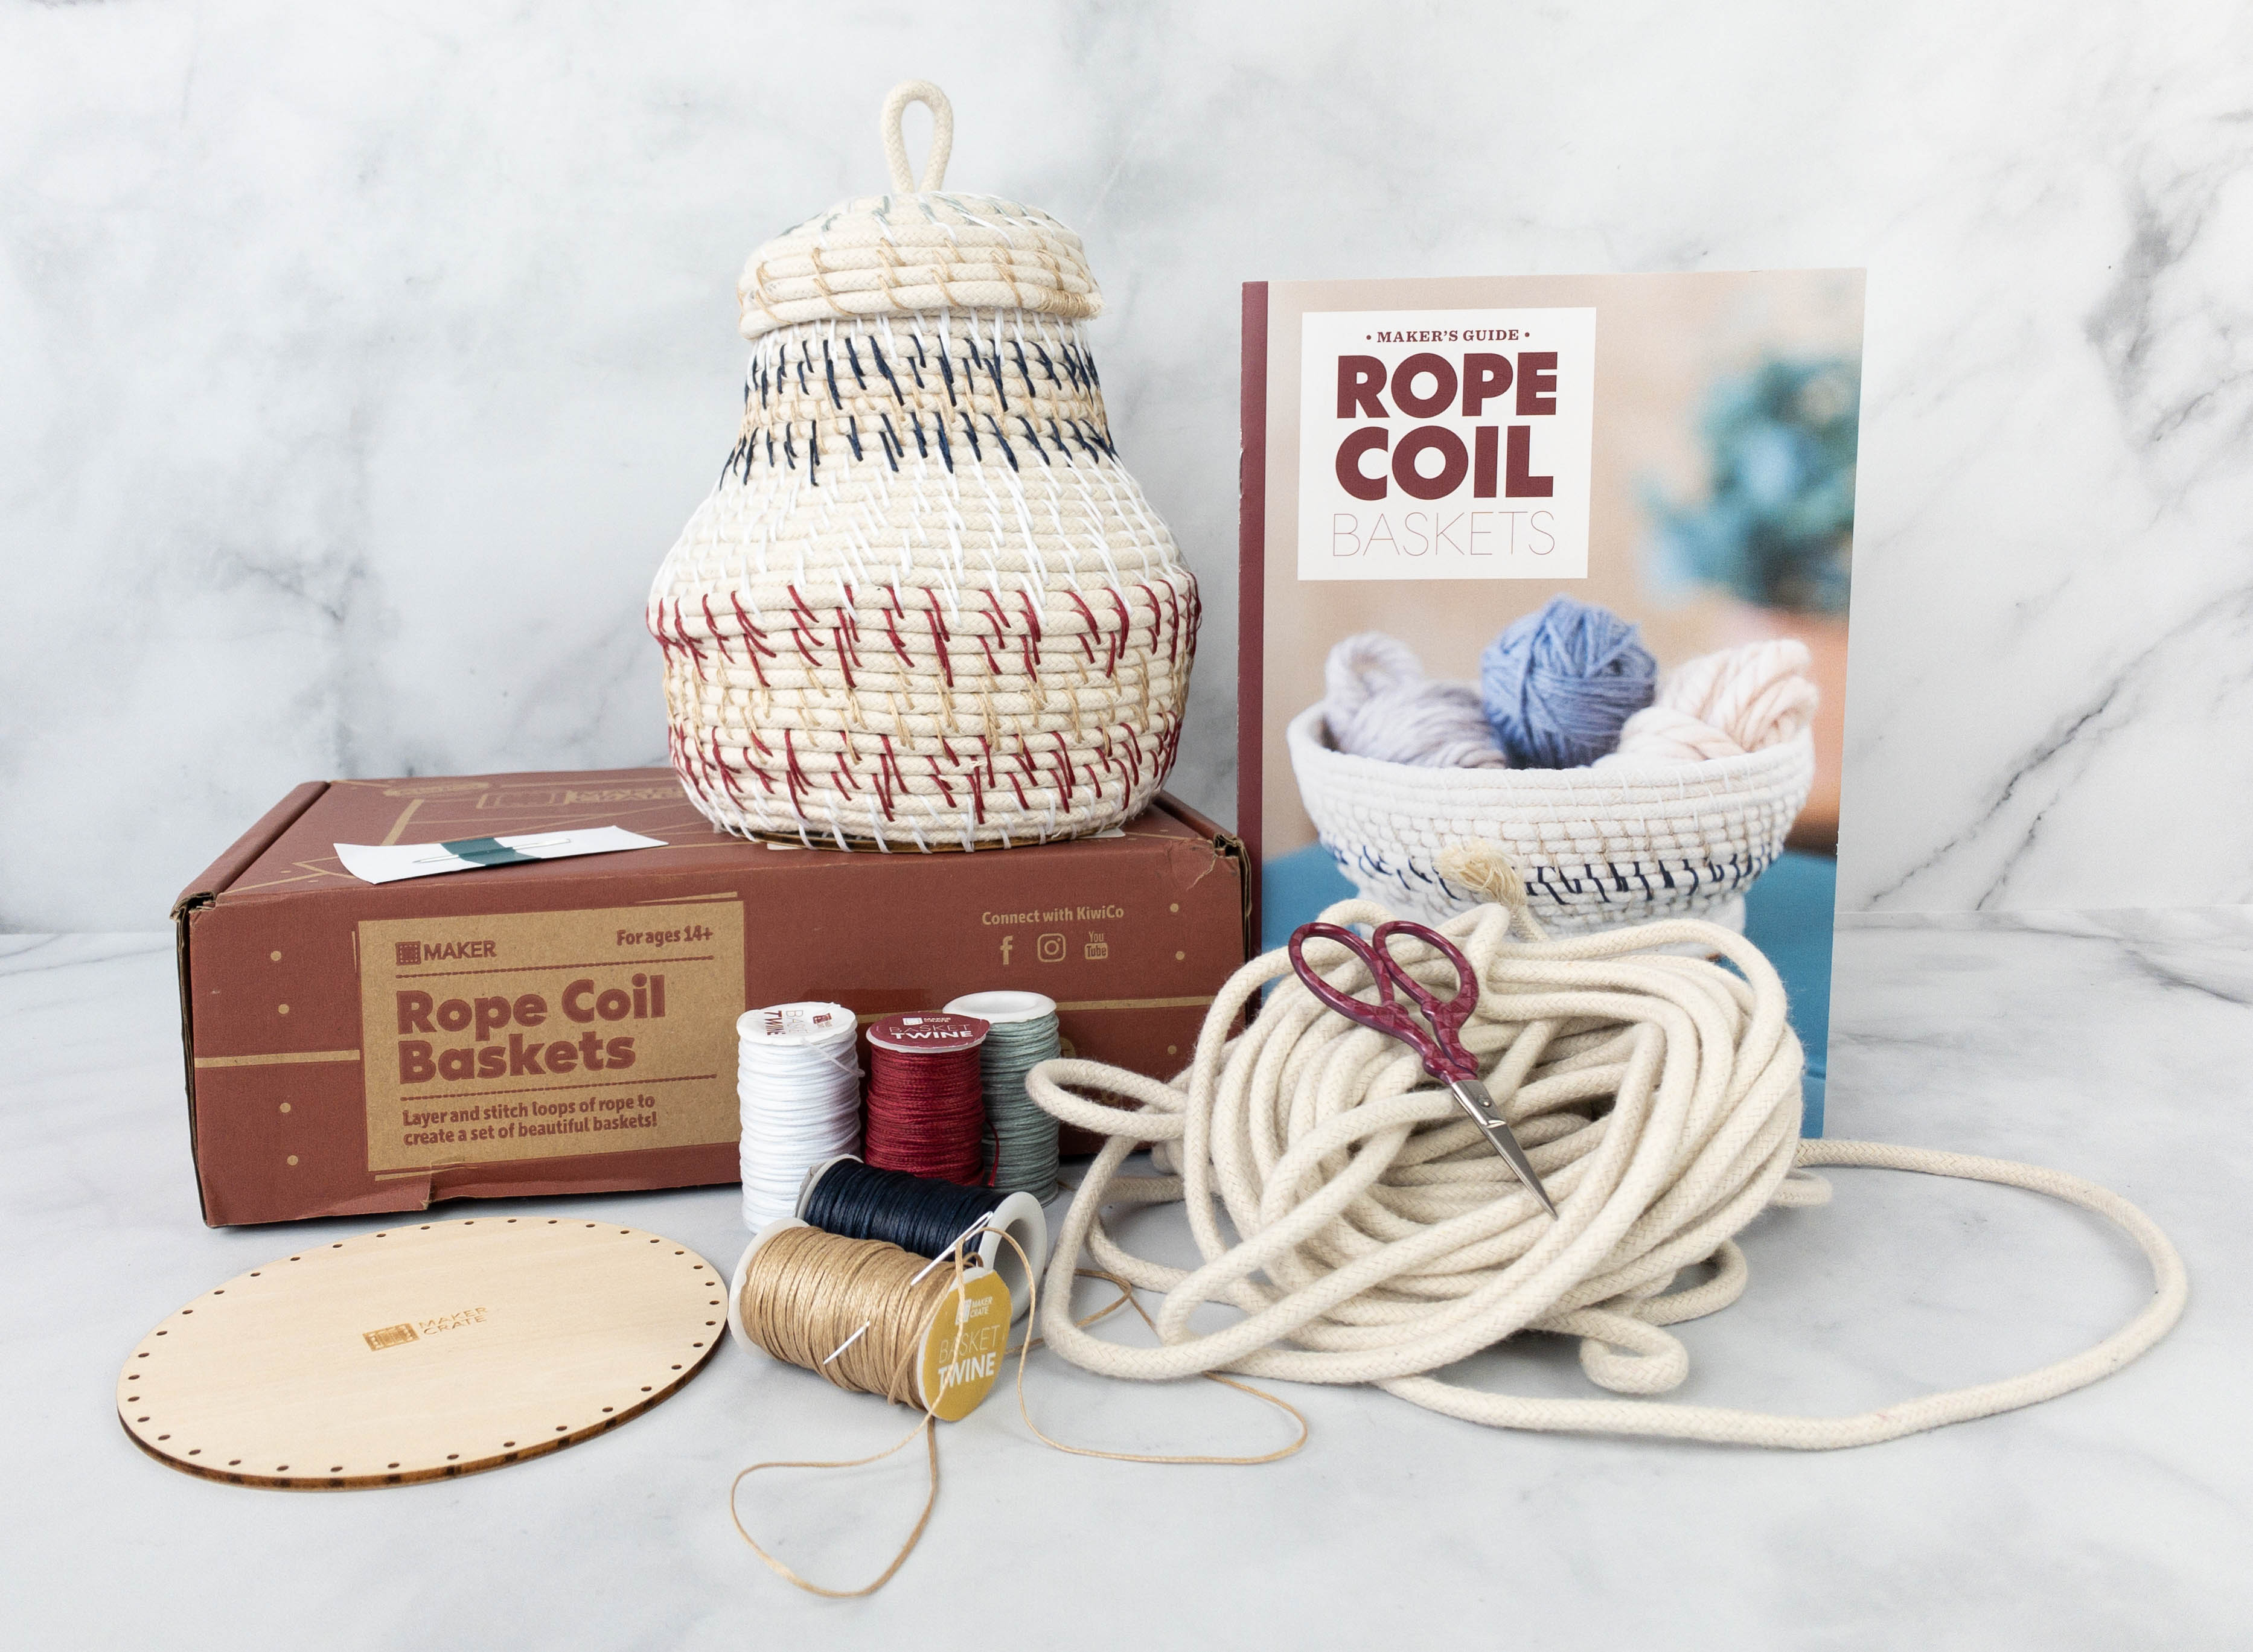 Maker Crate Review + Coupon - ROPE COIL BASKETS - Hello Subscription